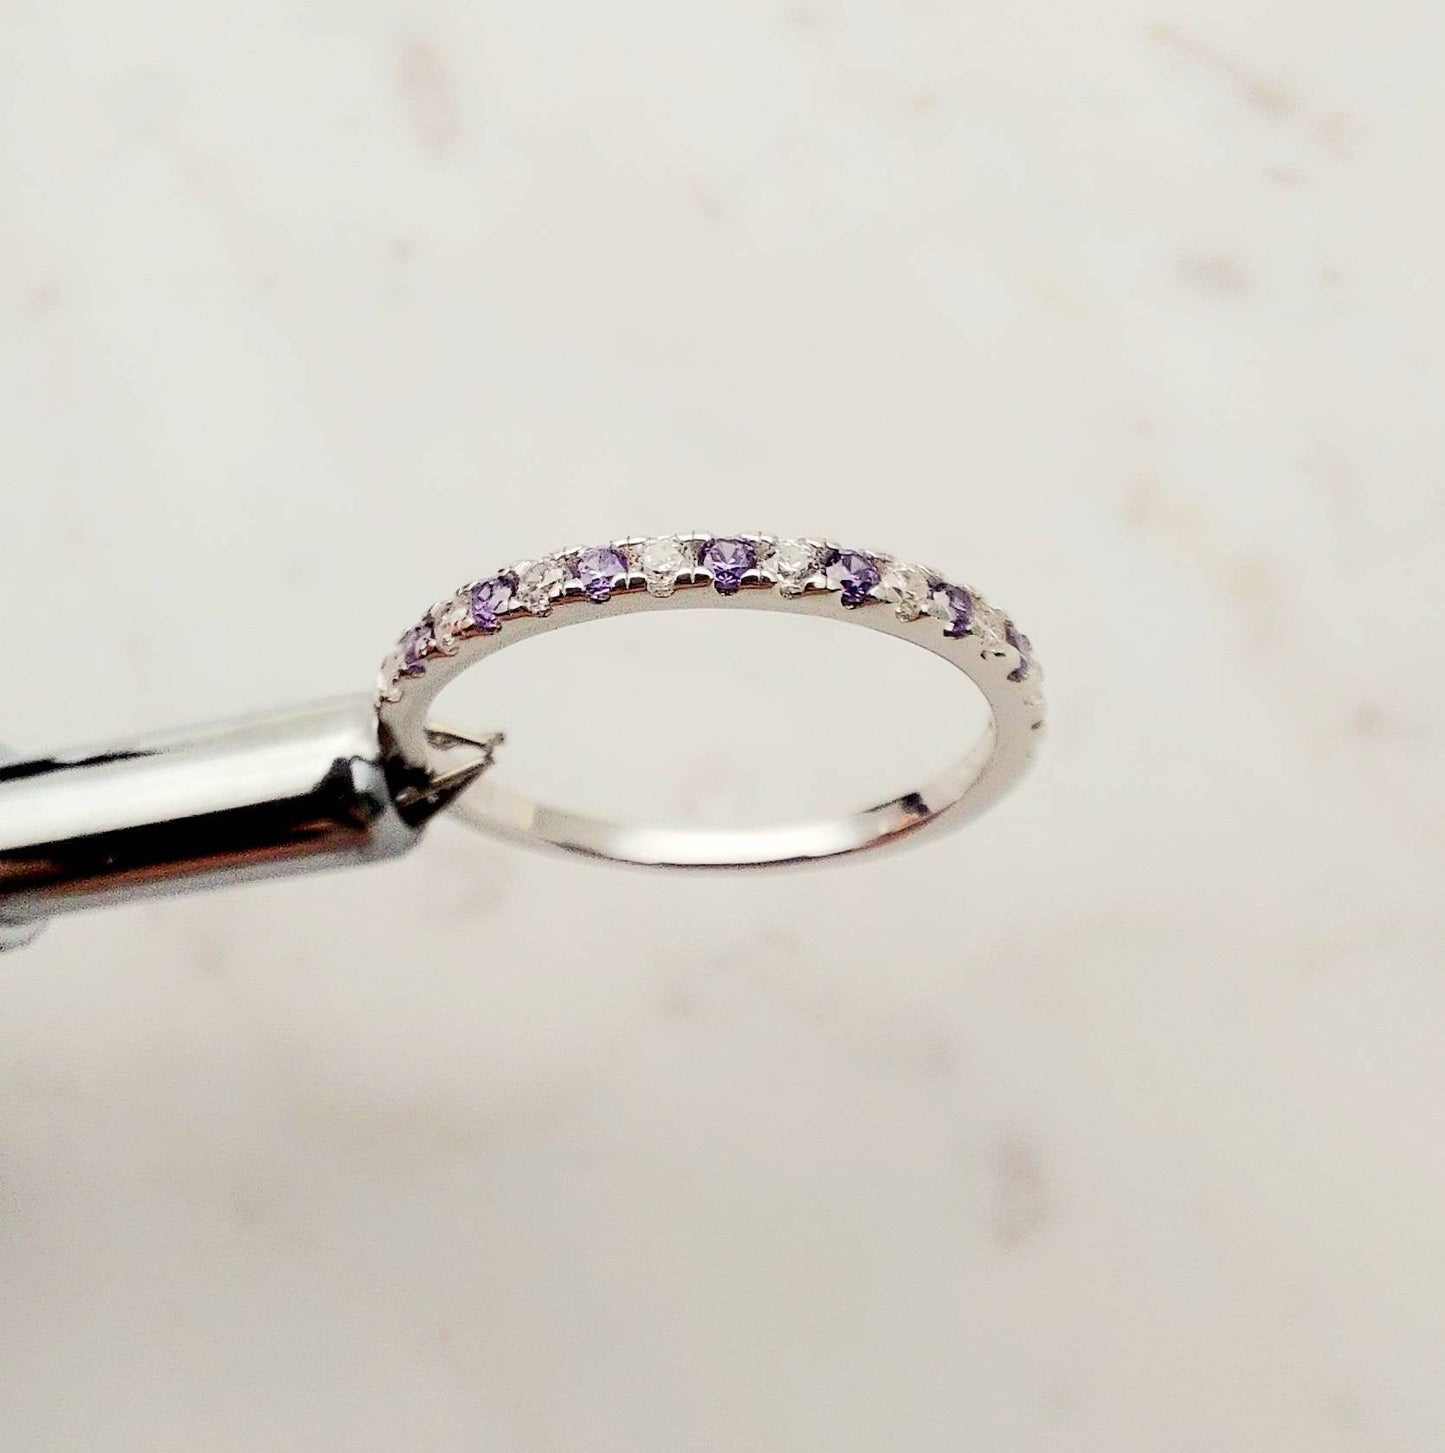 1.8mm wide Amethyst and diamond Half Eternity ring - stacking ring - wedding band in white gold or Silver